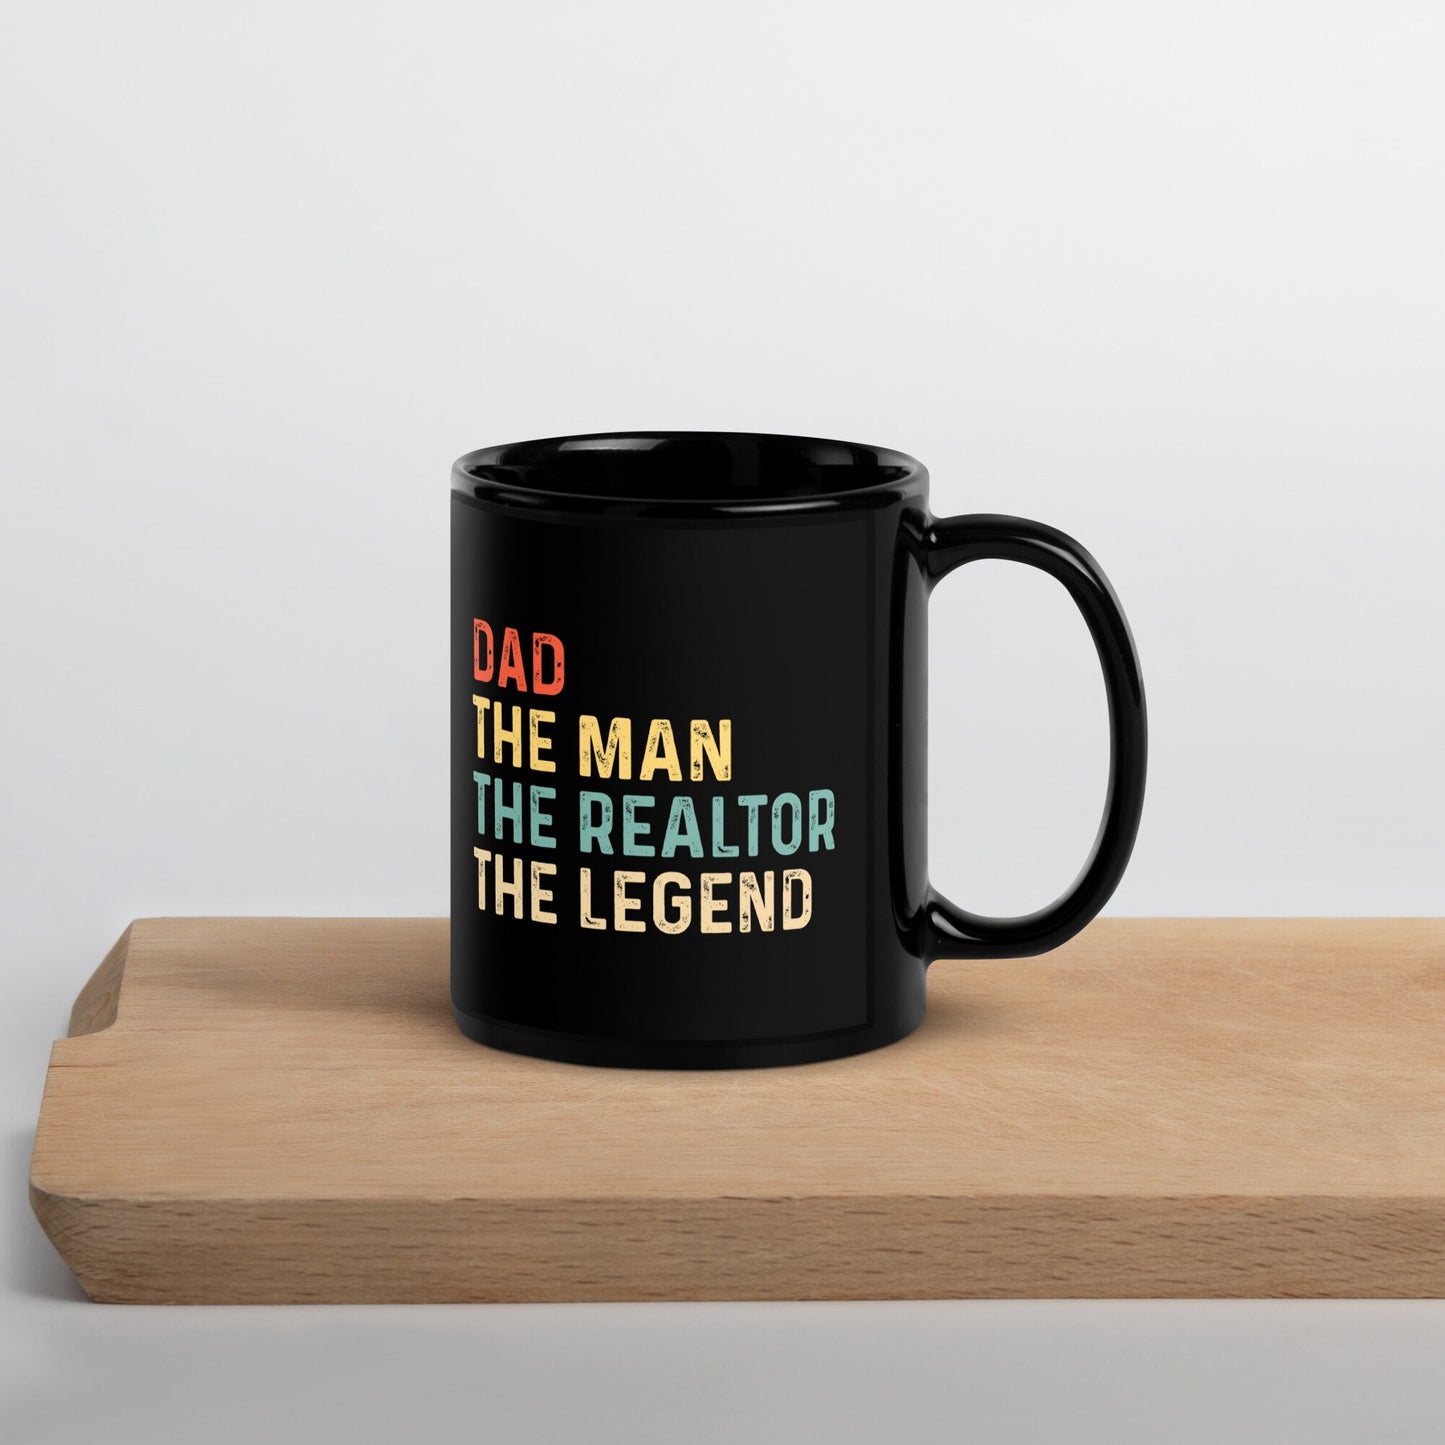 Dad | The Man | The Realtor | The Legend | REALTOR | Real Estate Agent Father's Day Gift | Black Glossy Mug 11 & 15oz